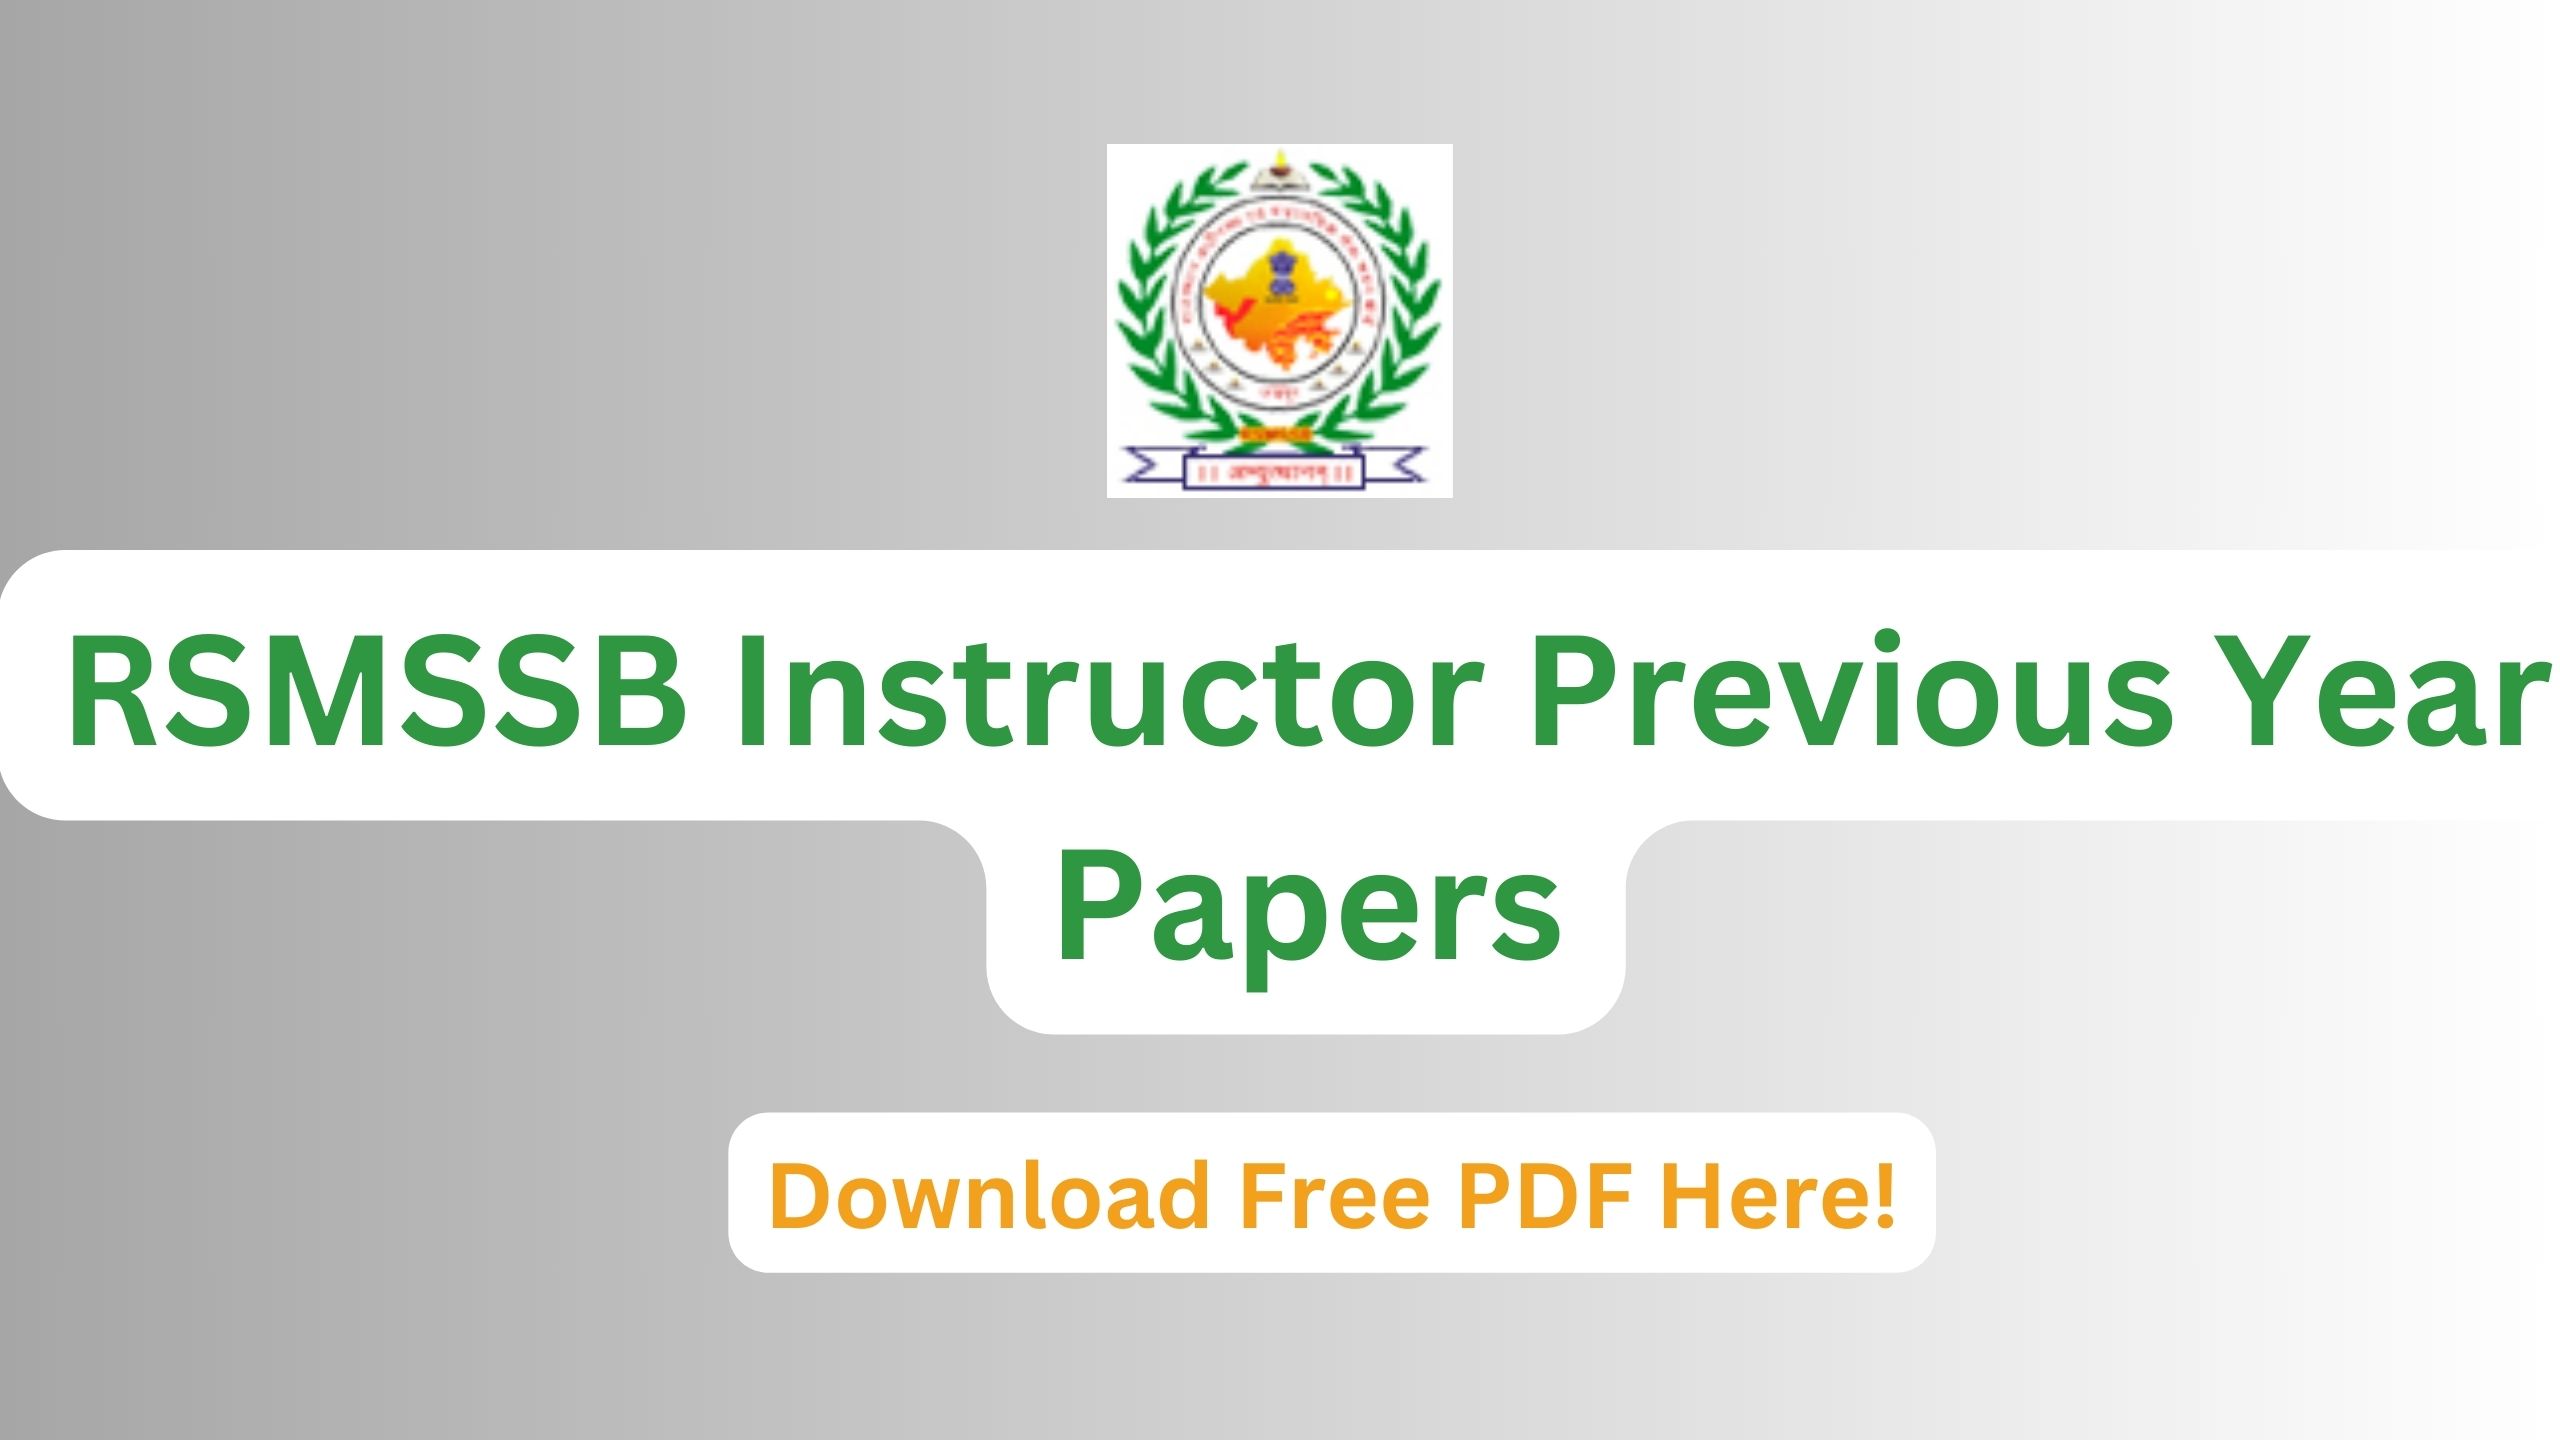 RSMSSB Instructor Previous Year Papers, Download 2018 Paper Here!